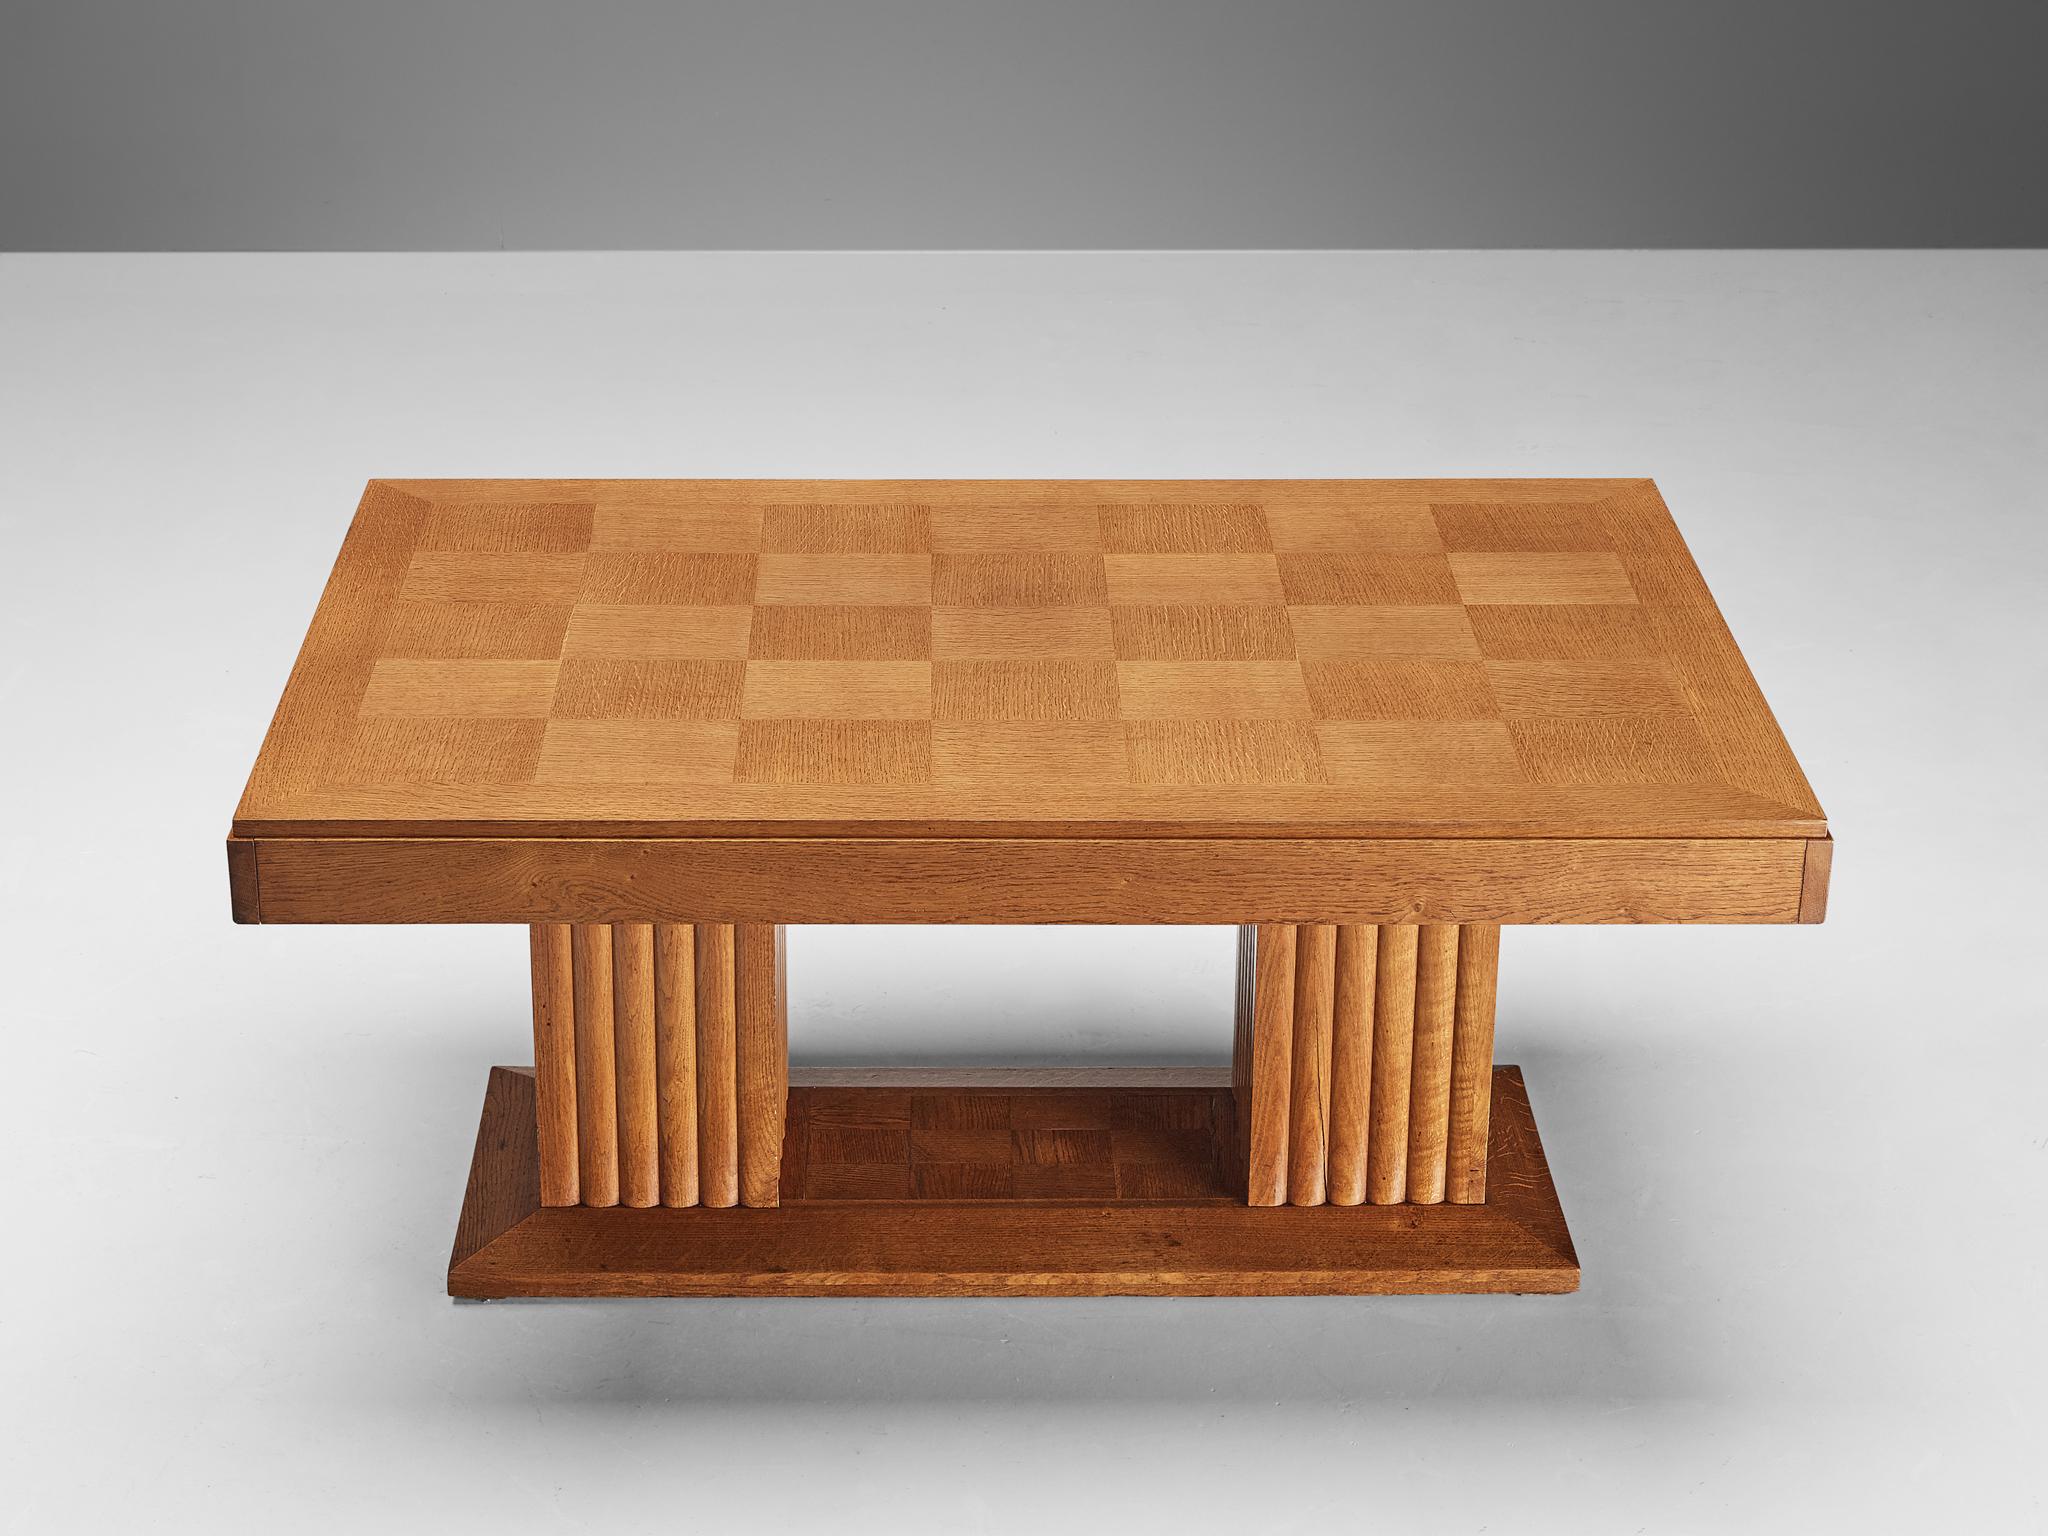 Christian Krass Table in Oak with Inlayed Top